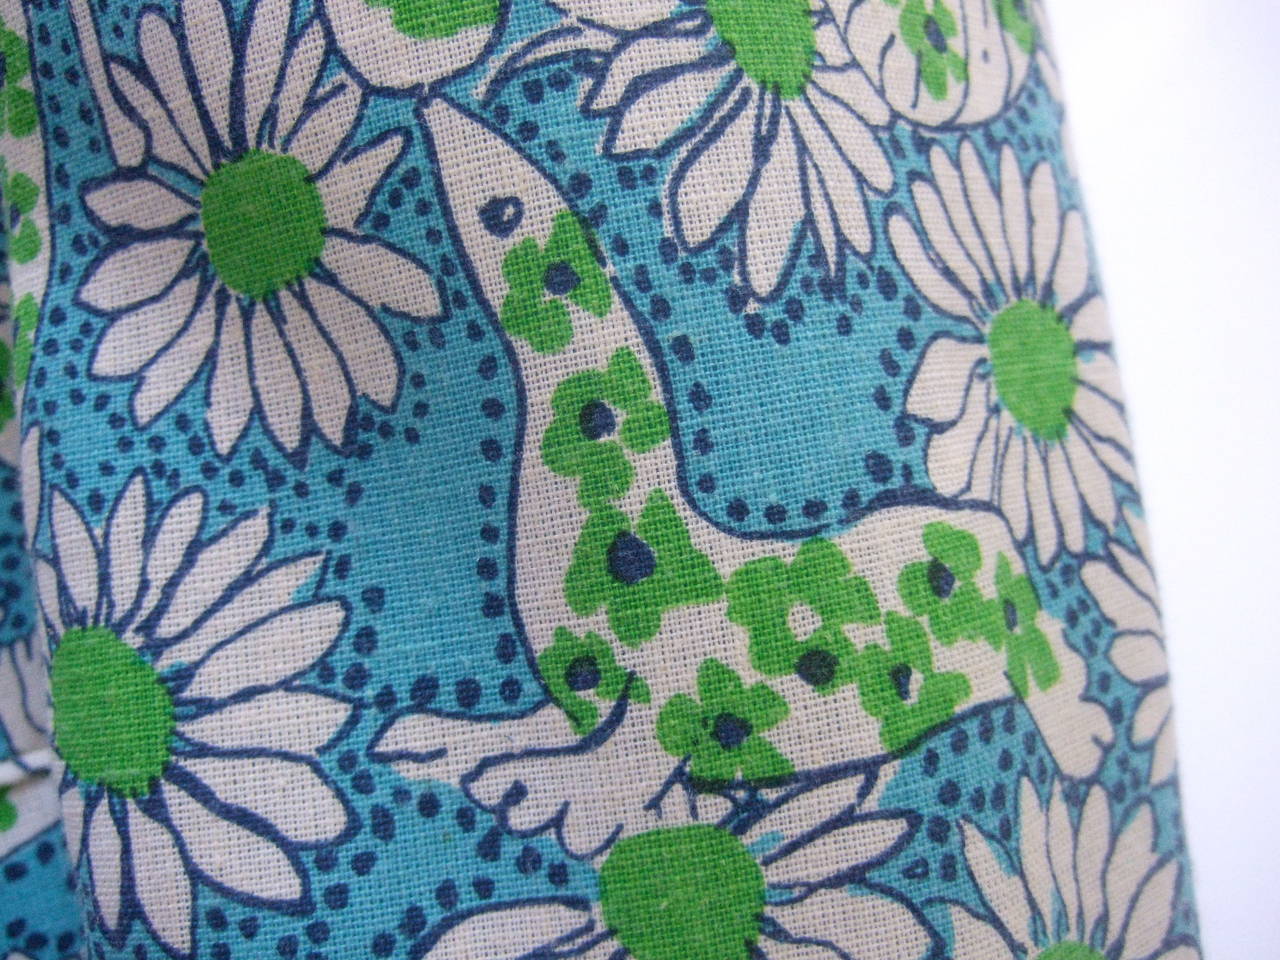 Blue Lilly Pulitzer Men's Whimsical Jungle Print Jacket c 1970s Size 41